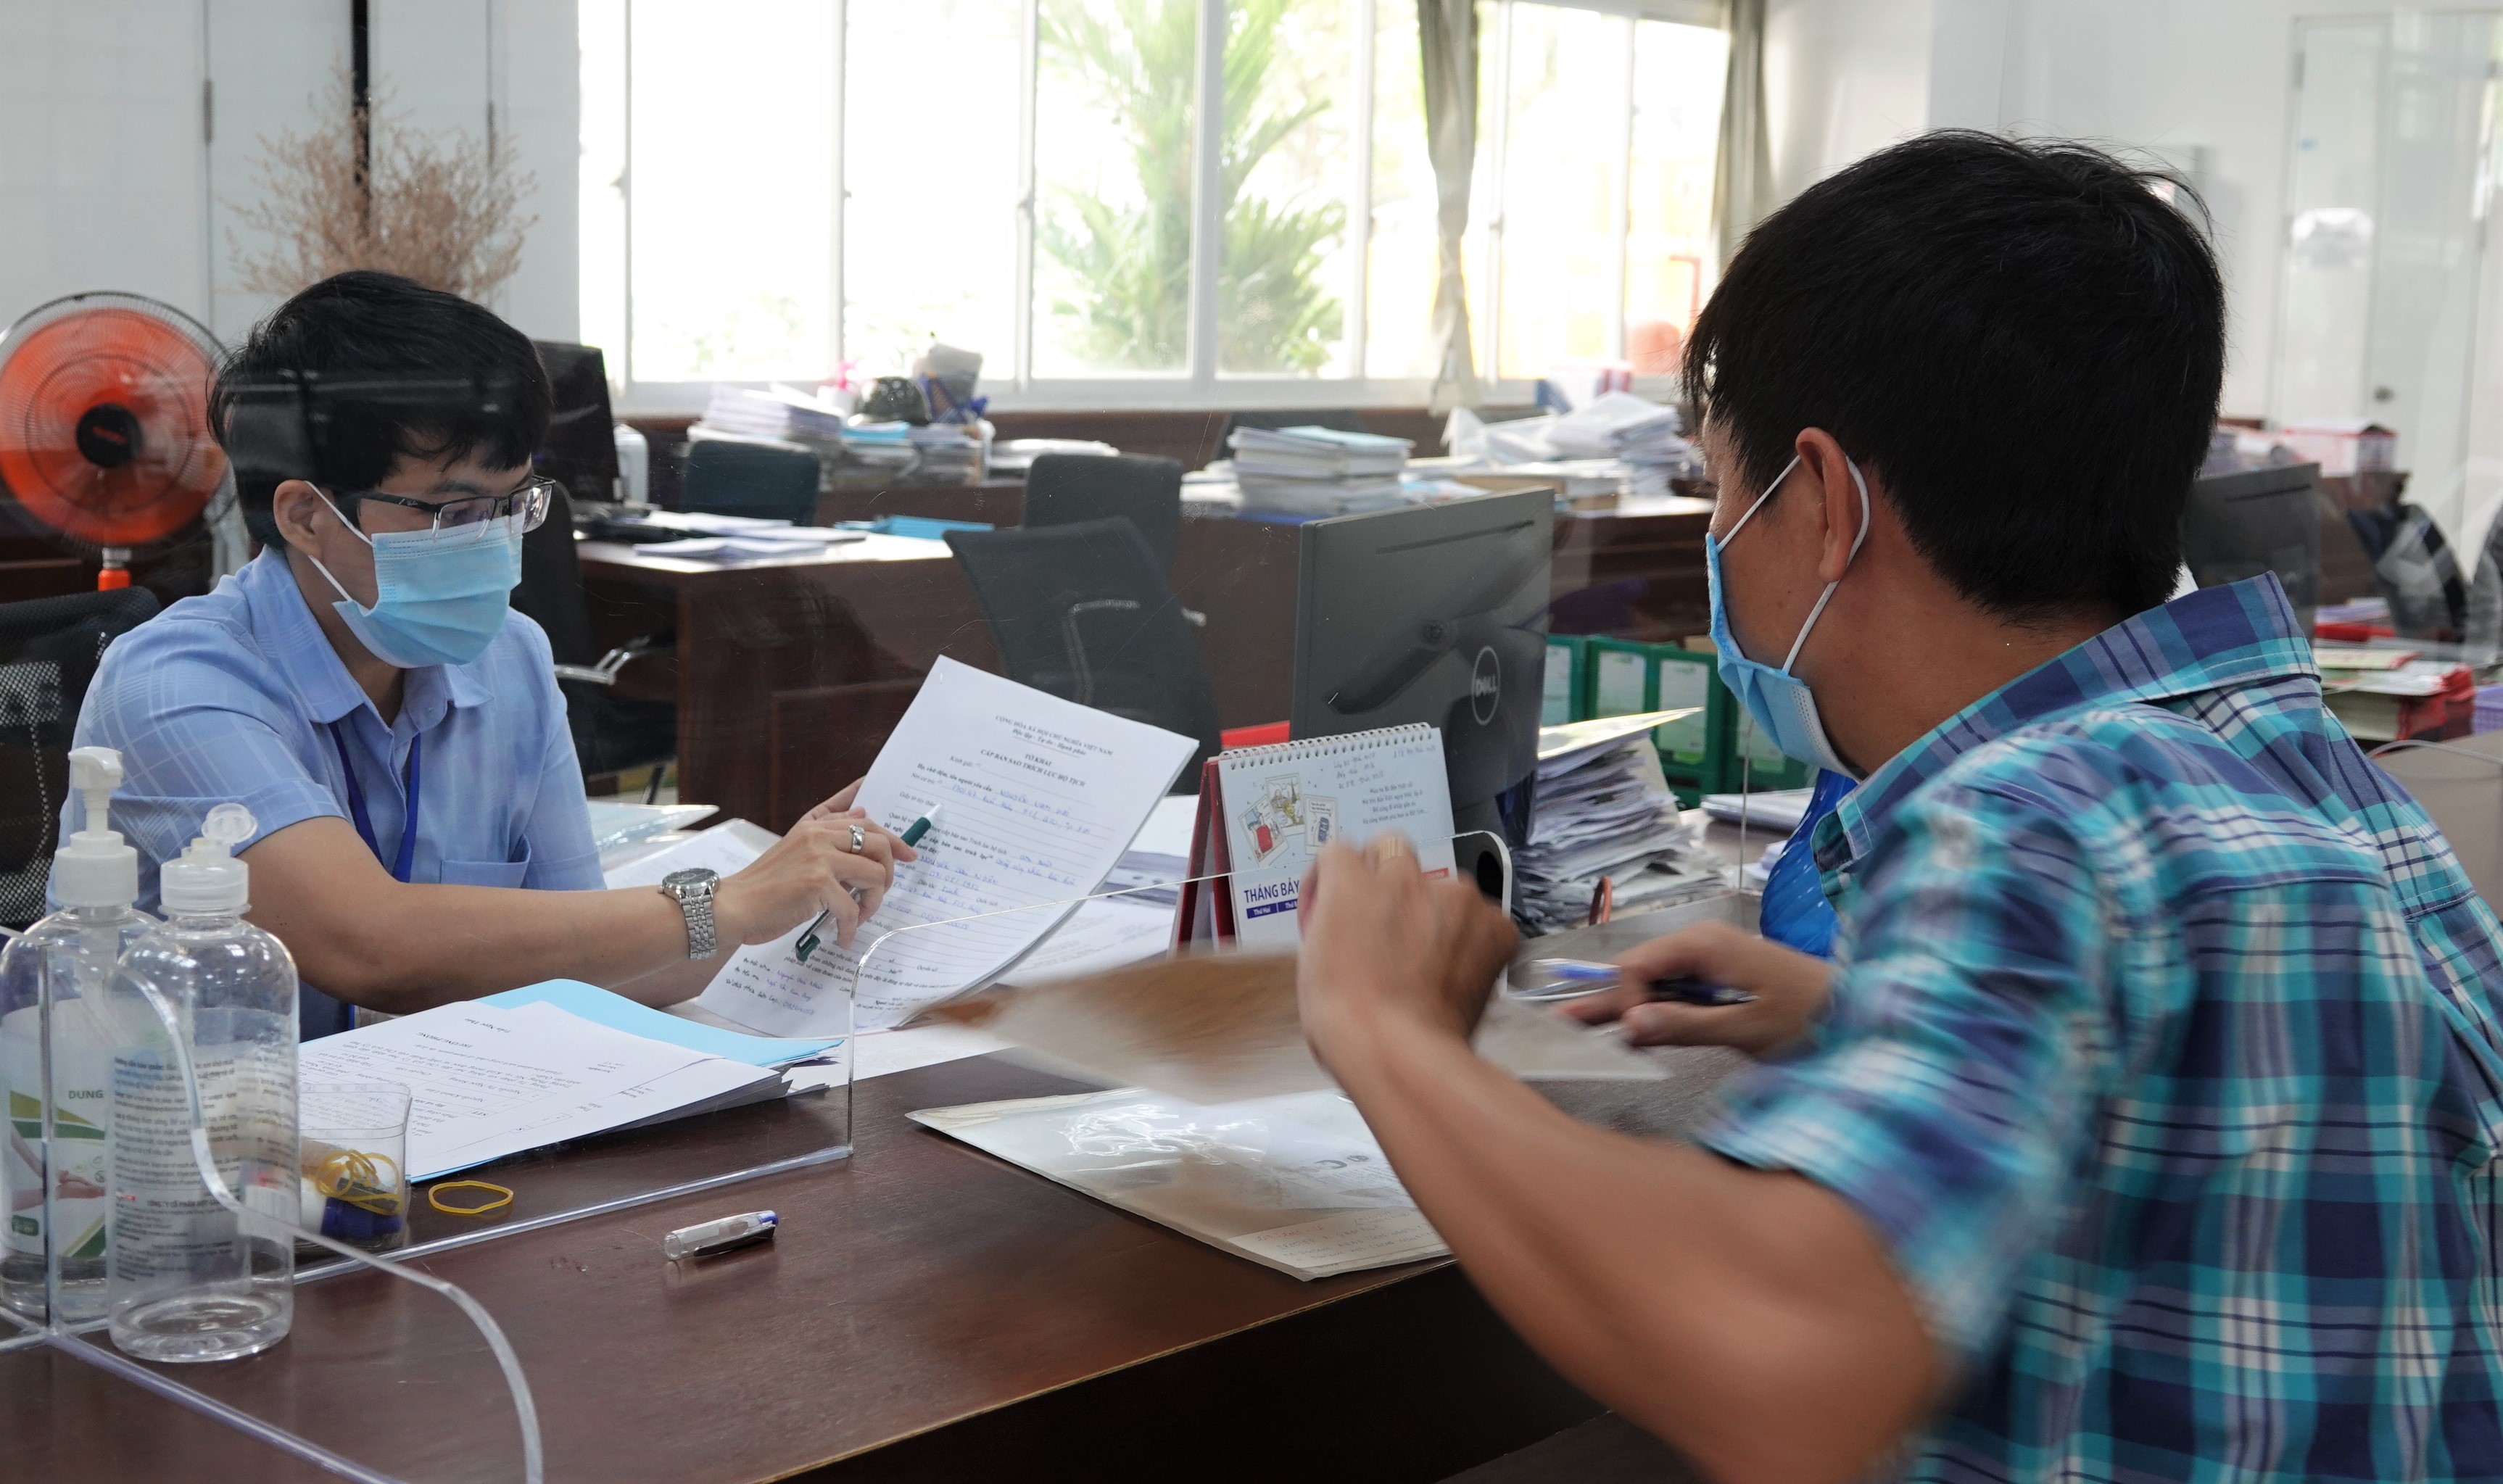 Vietnam: In which case shall public employee dossiers be amended?